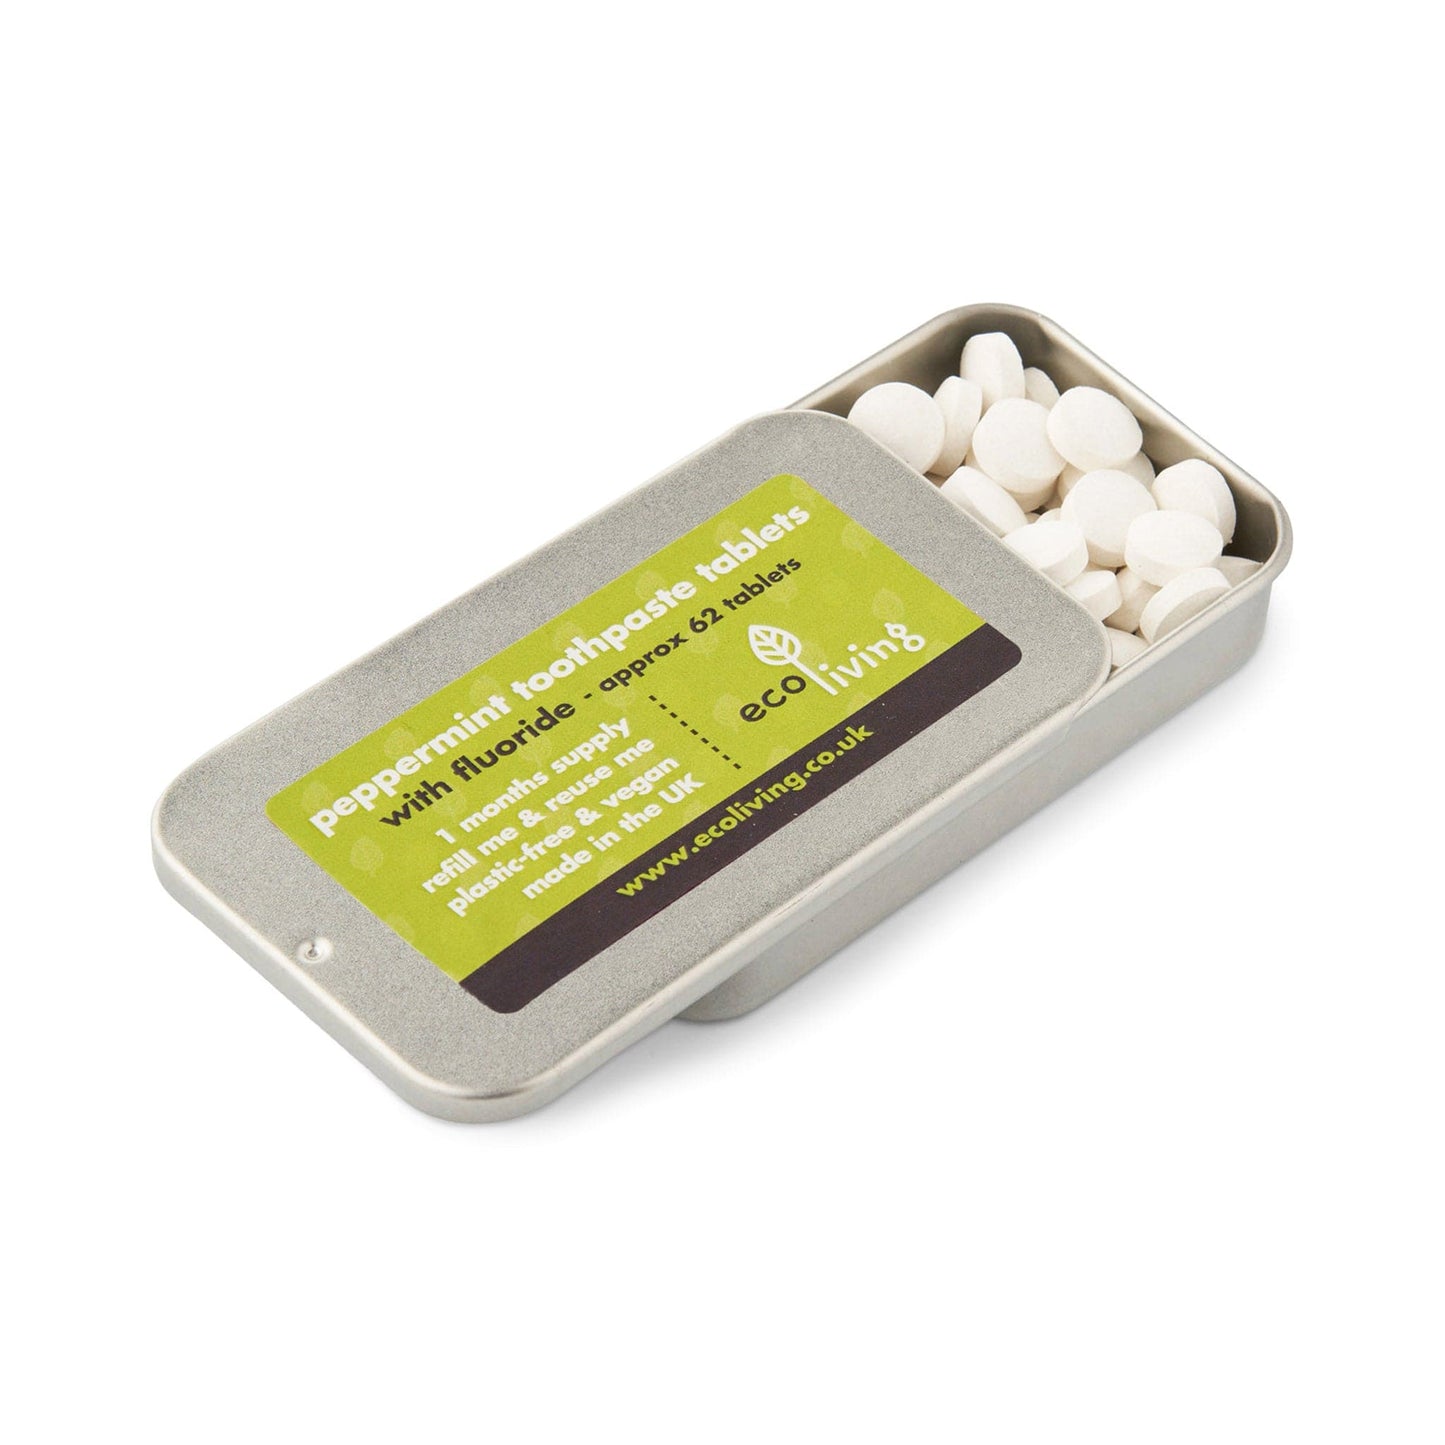 ecoliving Toothpaste Refillable Tin 62 Tabs EcoLiving Toothpaste Tablets in Refillable Tin & Refills - Mint with Flouride